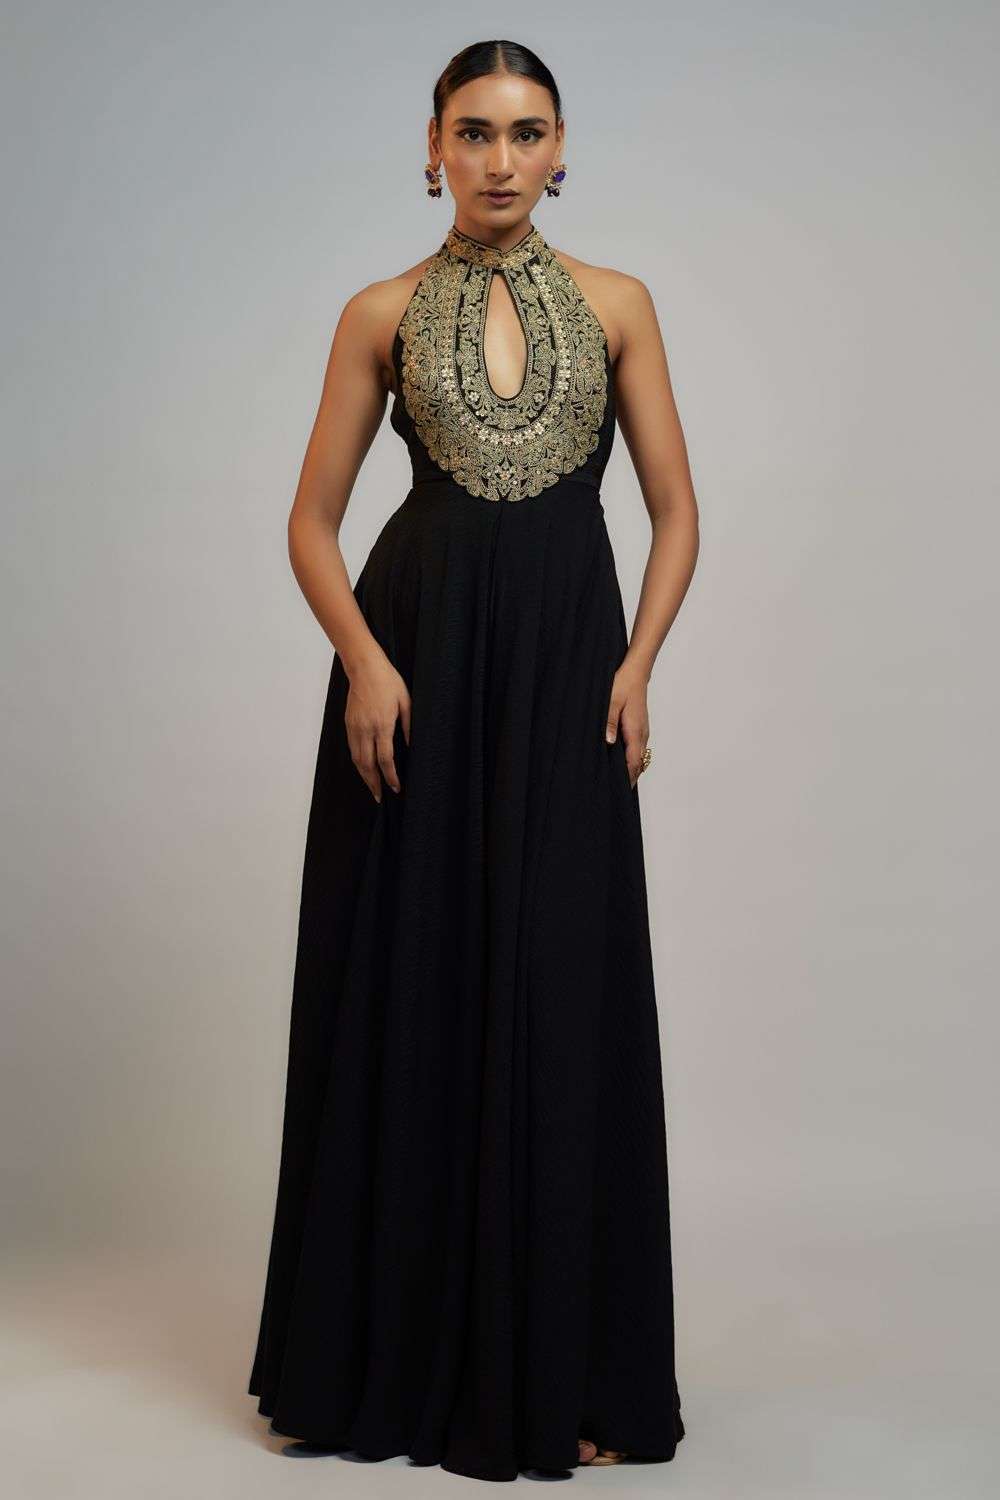 Indian Ethnic Wear Online Store | Designer gowns, Gowns, Party wear gown